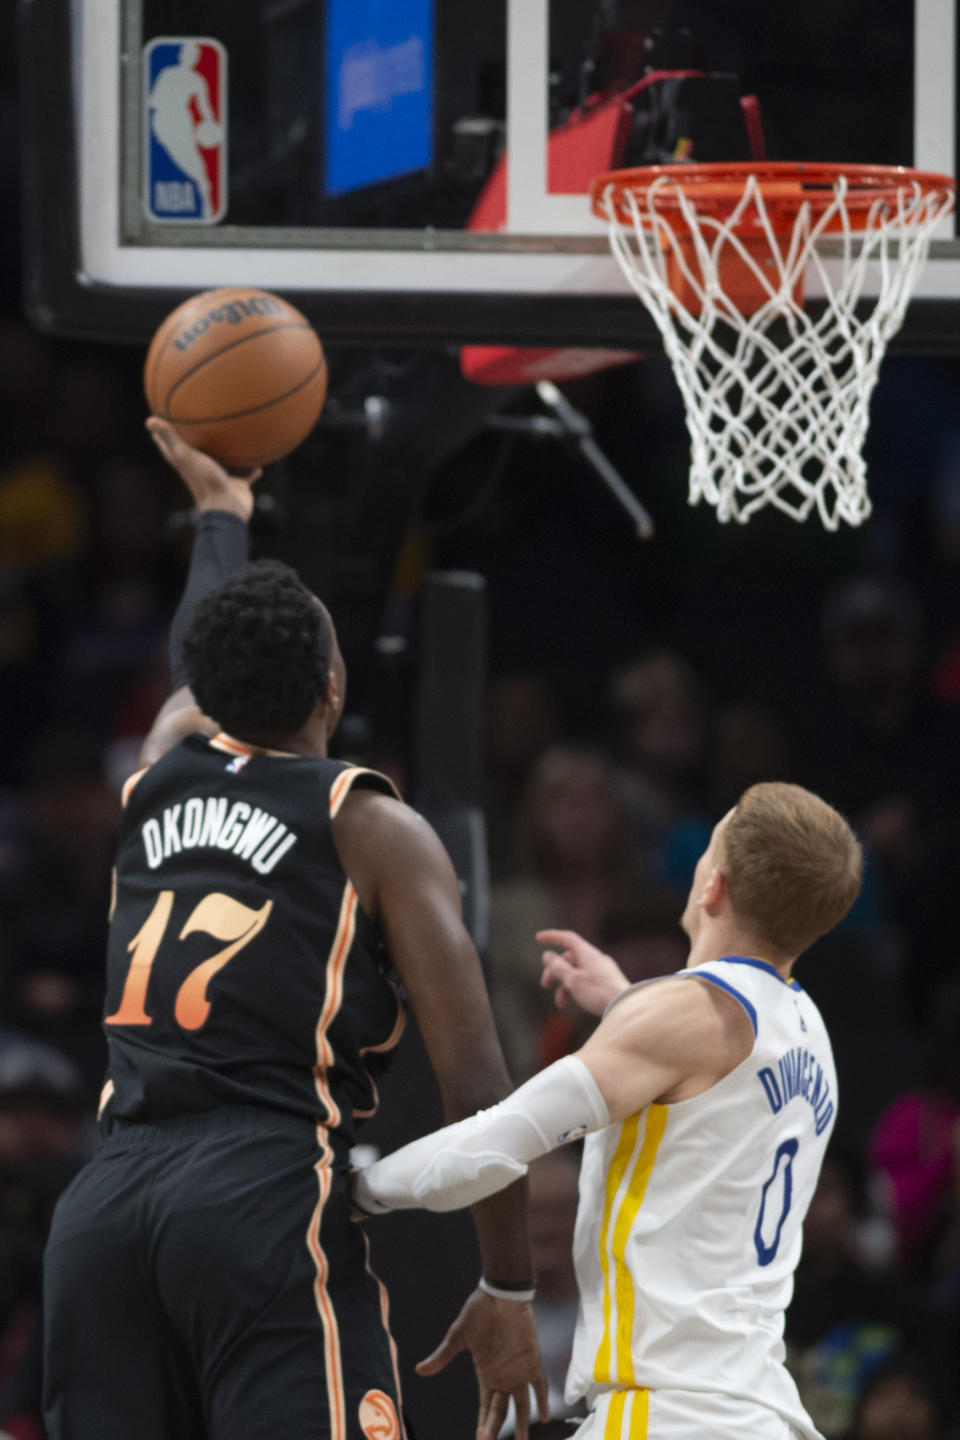 Atlanta Hawks forward Onyeka Okongwu scores past Golden State Warriors guard Donte DiVincenzo during the second half of an NBA basketball game, Friday, March 17, 2023, in Atlanta. (AP Photo/Hakim Wright Sr.)